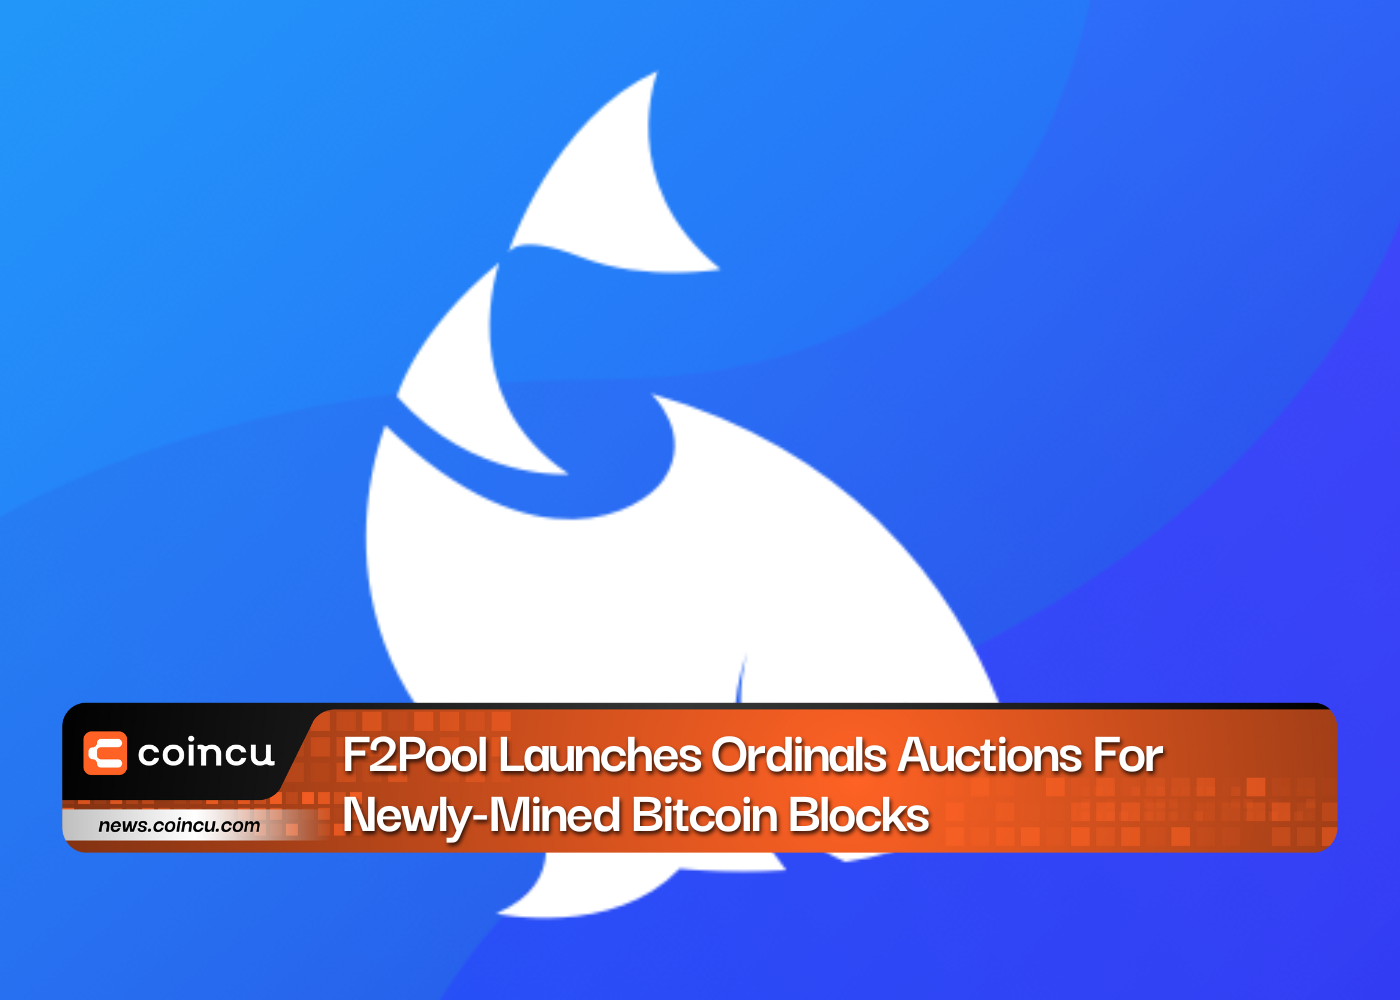 F2Pool Launches Ordinals Auctions For Newly-Mined Bitcoin Blocks